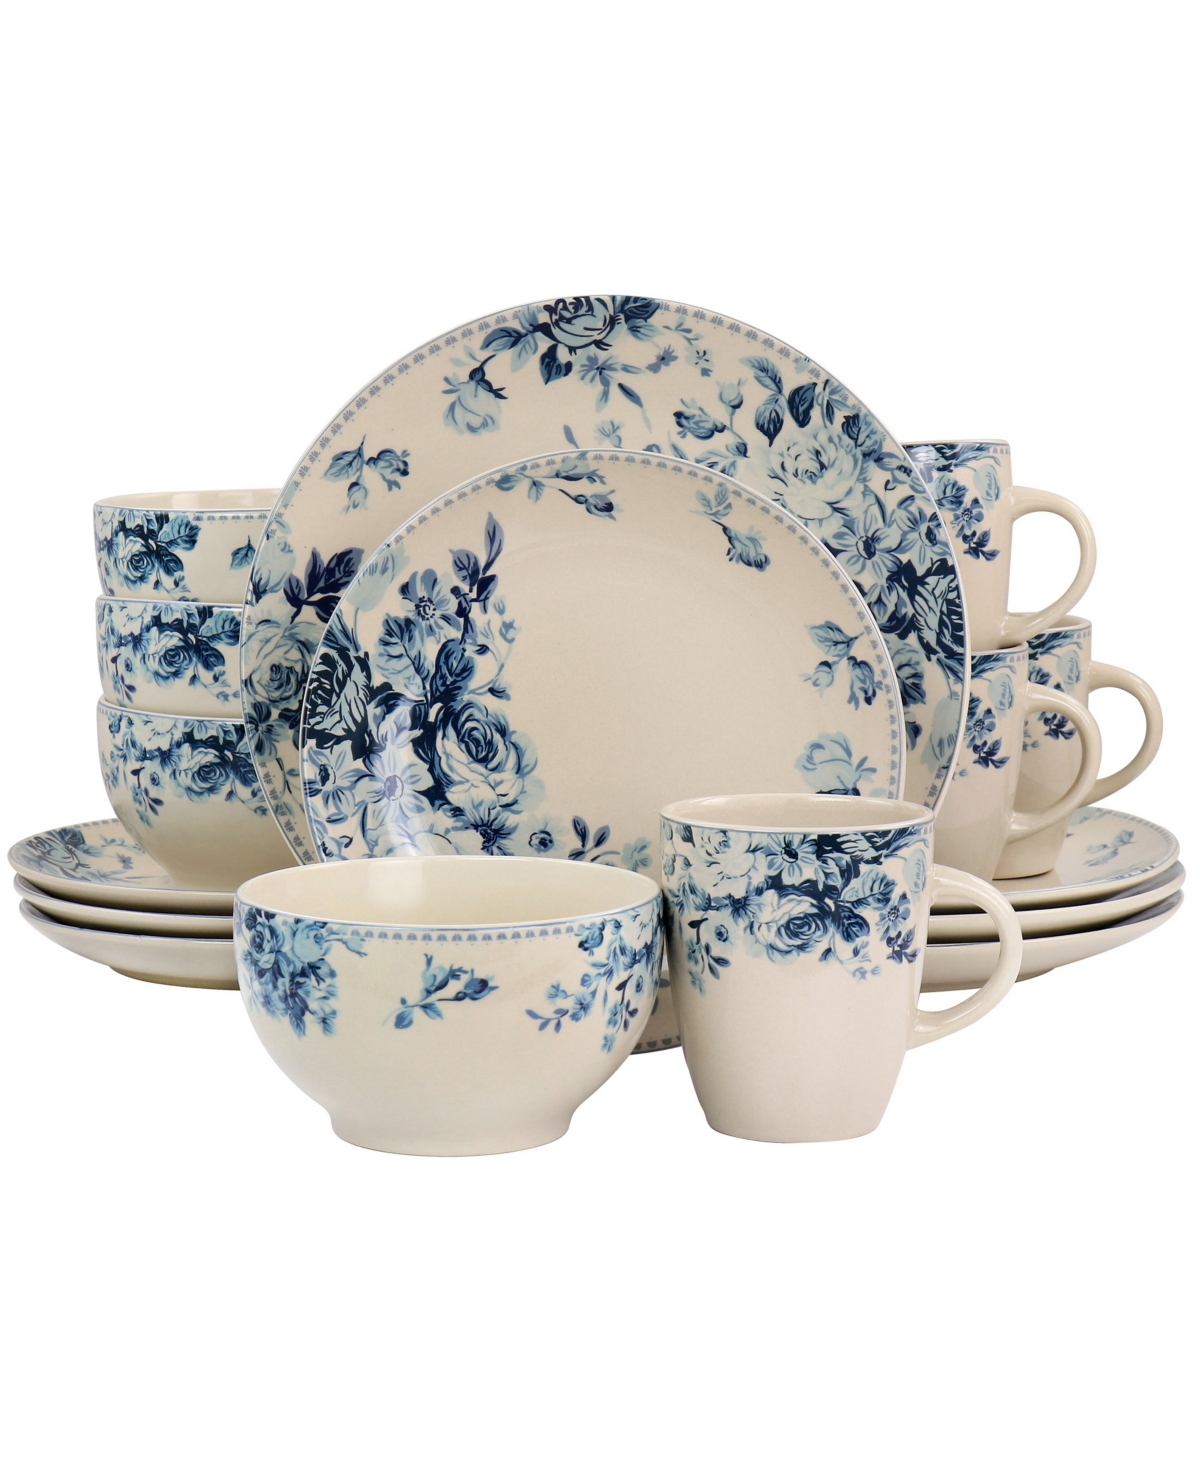 Floral Violet 16 Piece Dinnerware Set, Service for 4 - Taupe and Blue